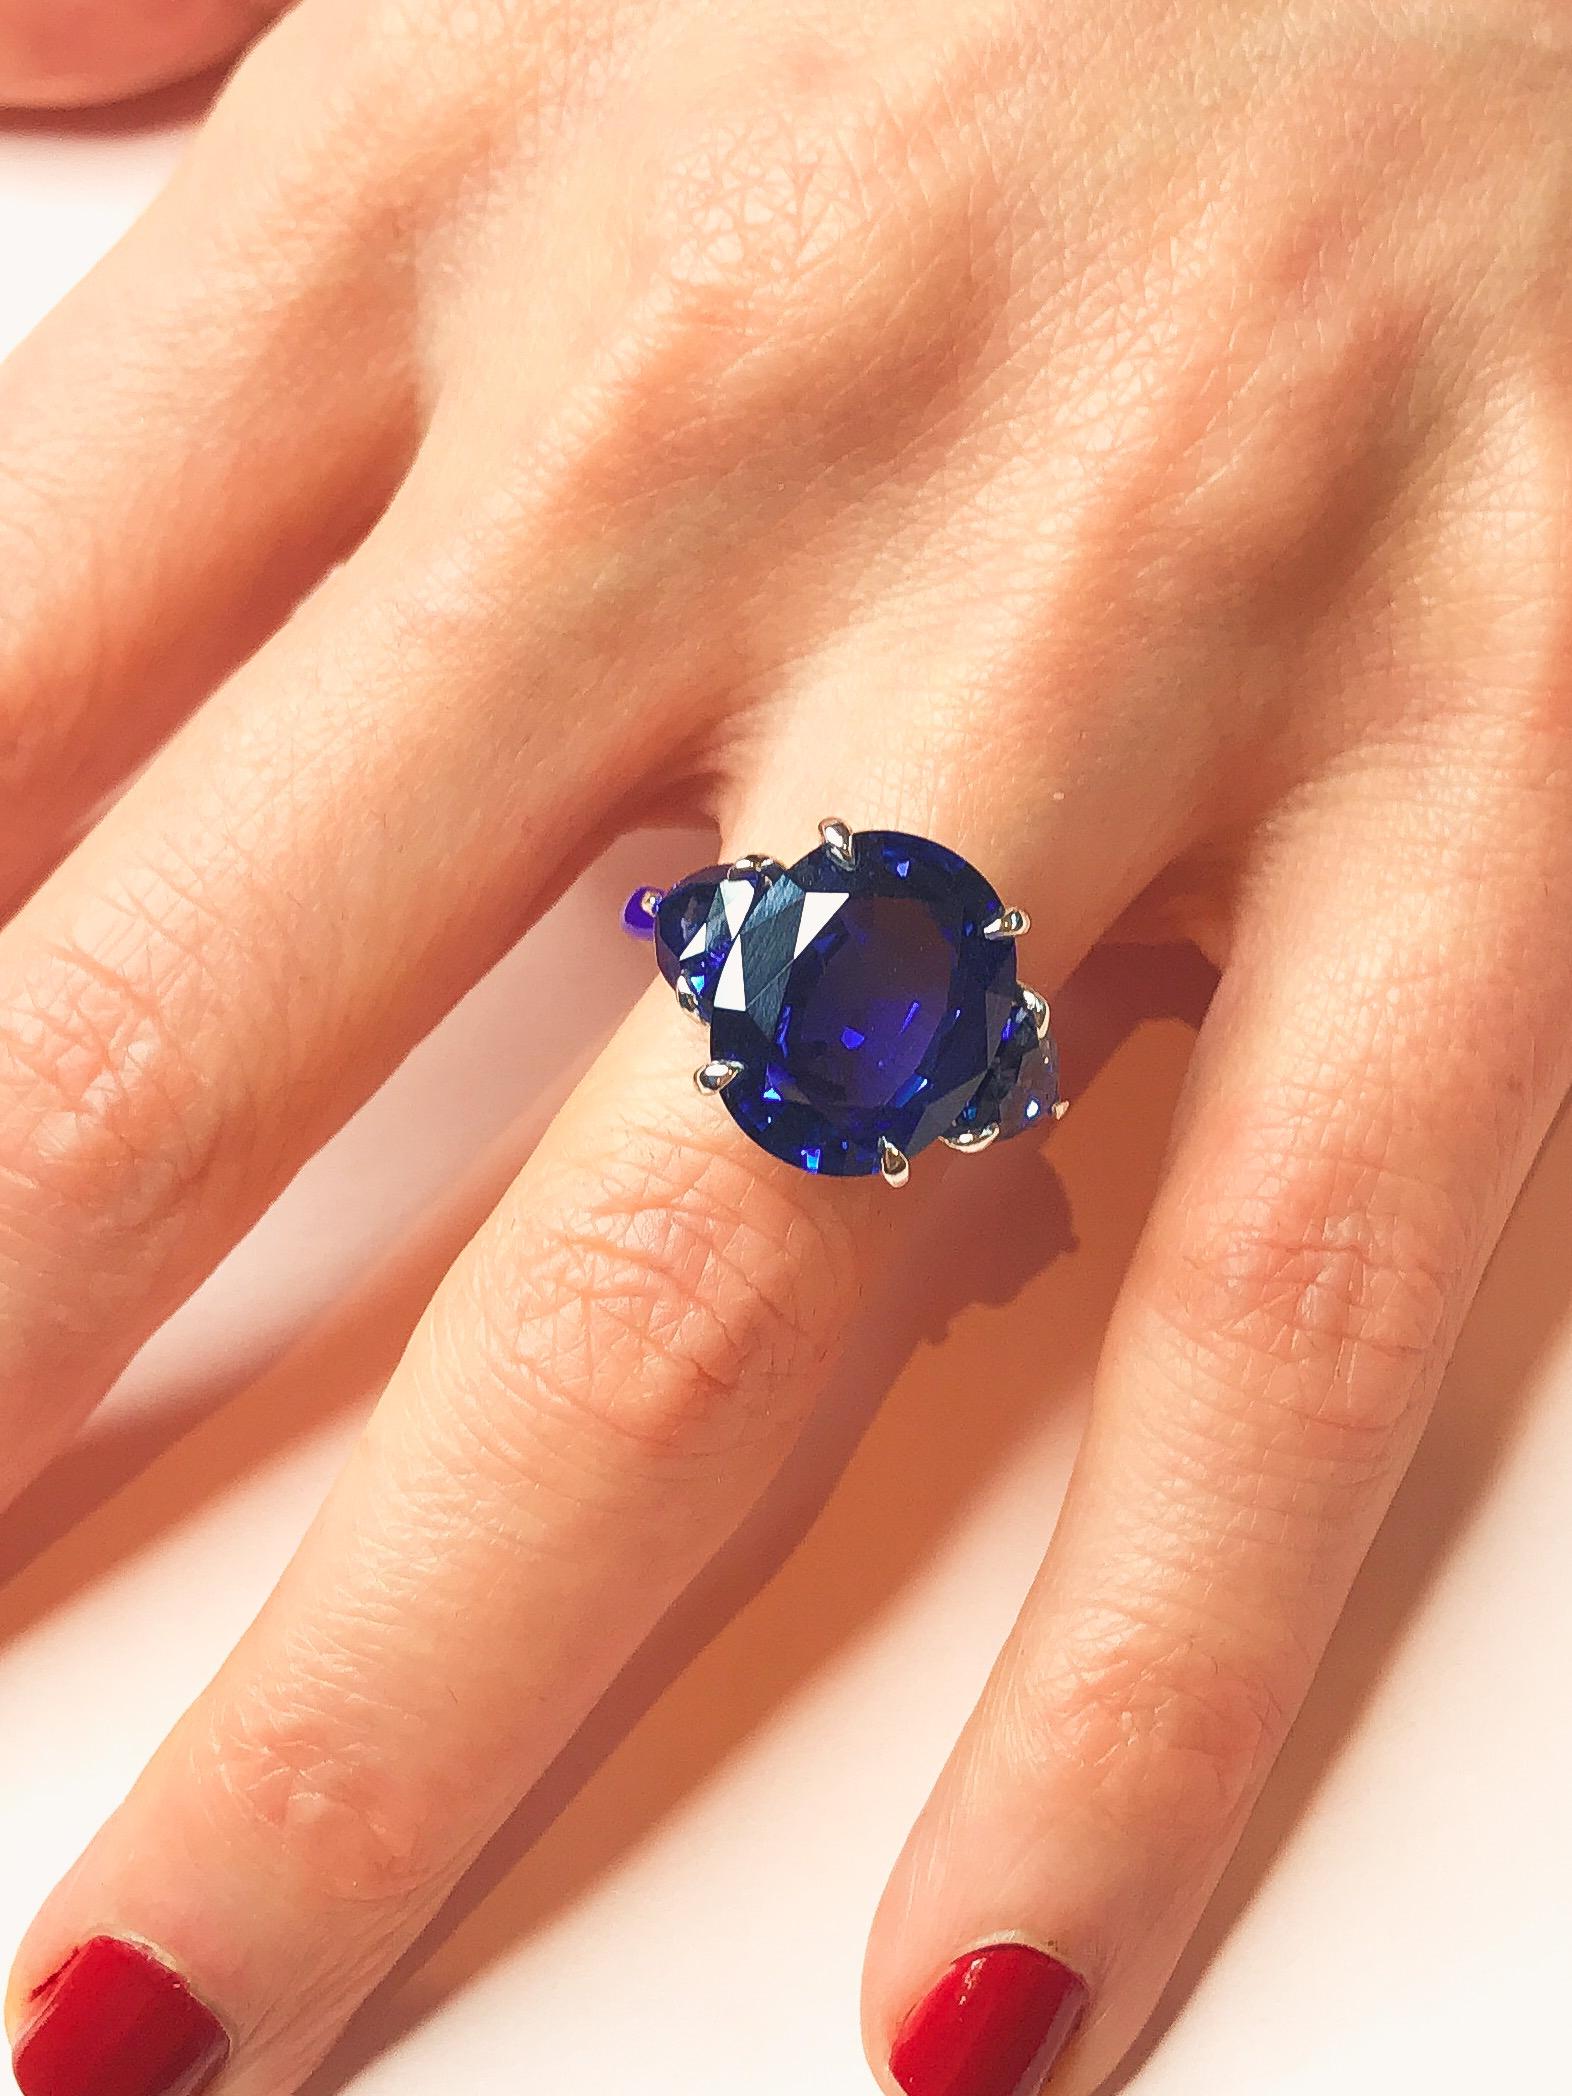 This truly special ring is sure to make its wearer feel extraordinary. Rare in its size and style of cut, the oval sapphire at the centre of the piece hails from Sri Lanka and weighs more than 10 carats. Its vivid royal blue colour is enhanced by